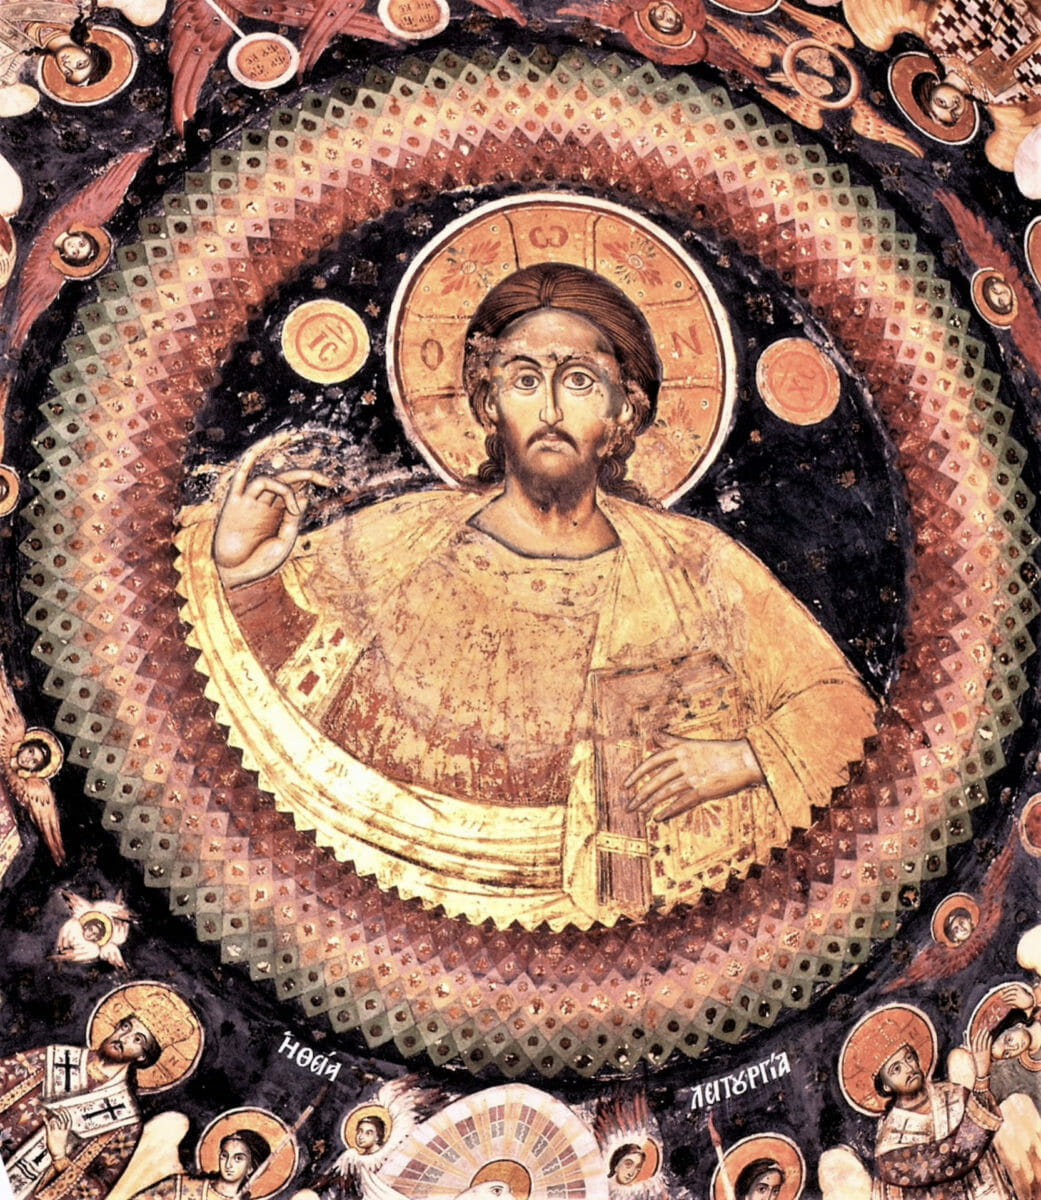 Pantocrator painting in the central dome with a partial depiction of the Holy Liturgy below